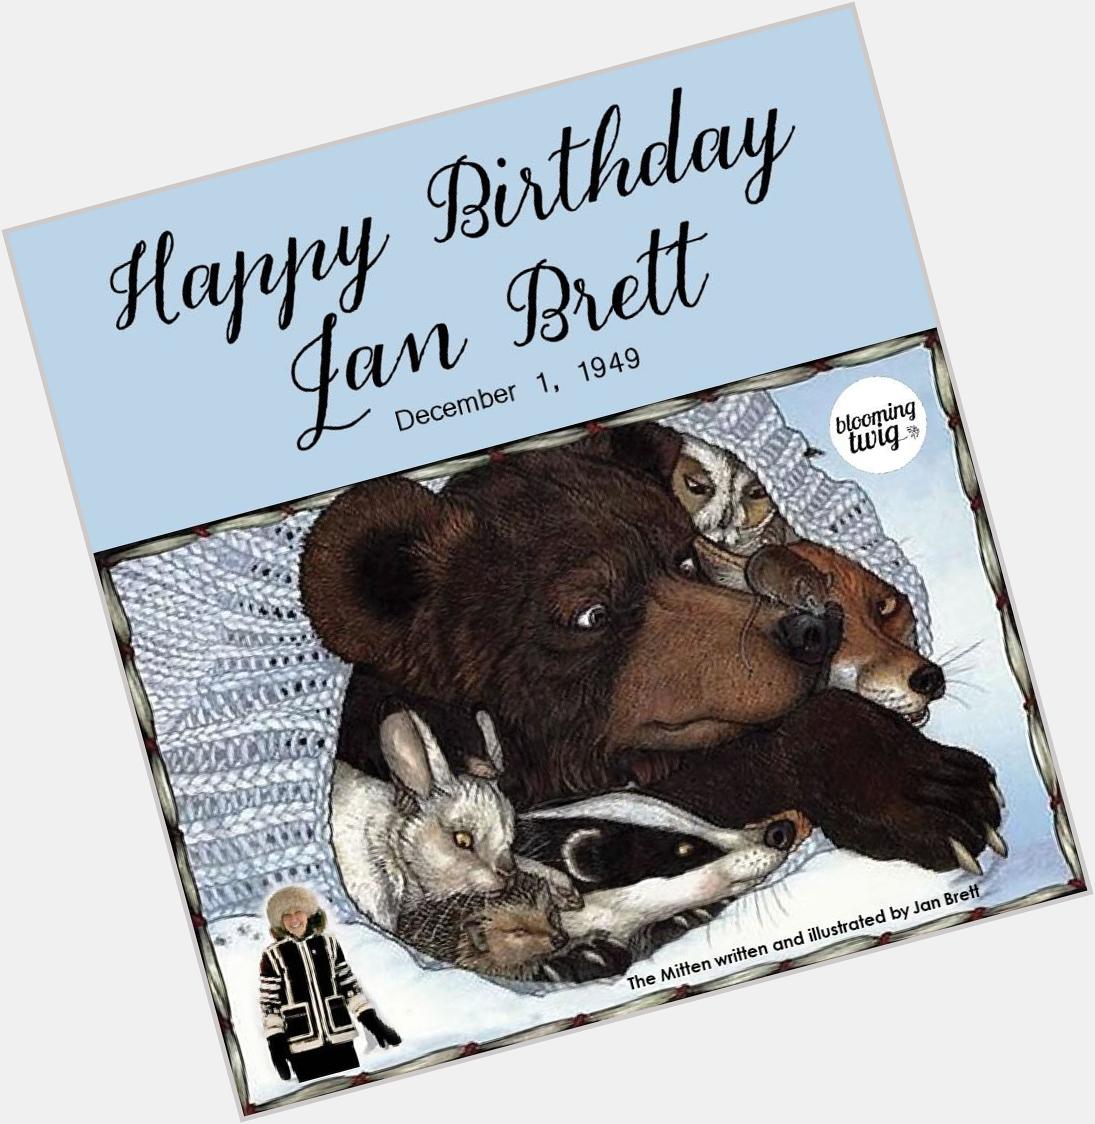 Happy birthday to Jan Brett, amazing author and illustrator of The Mitten and Trouble with Trolls! 